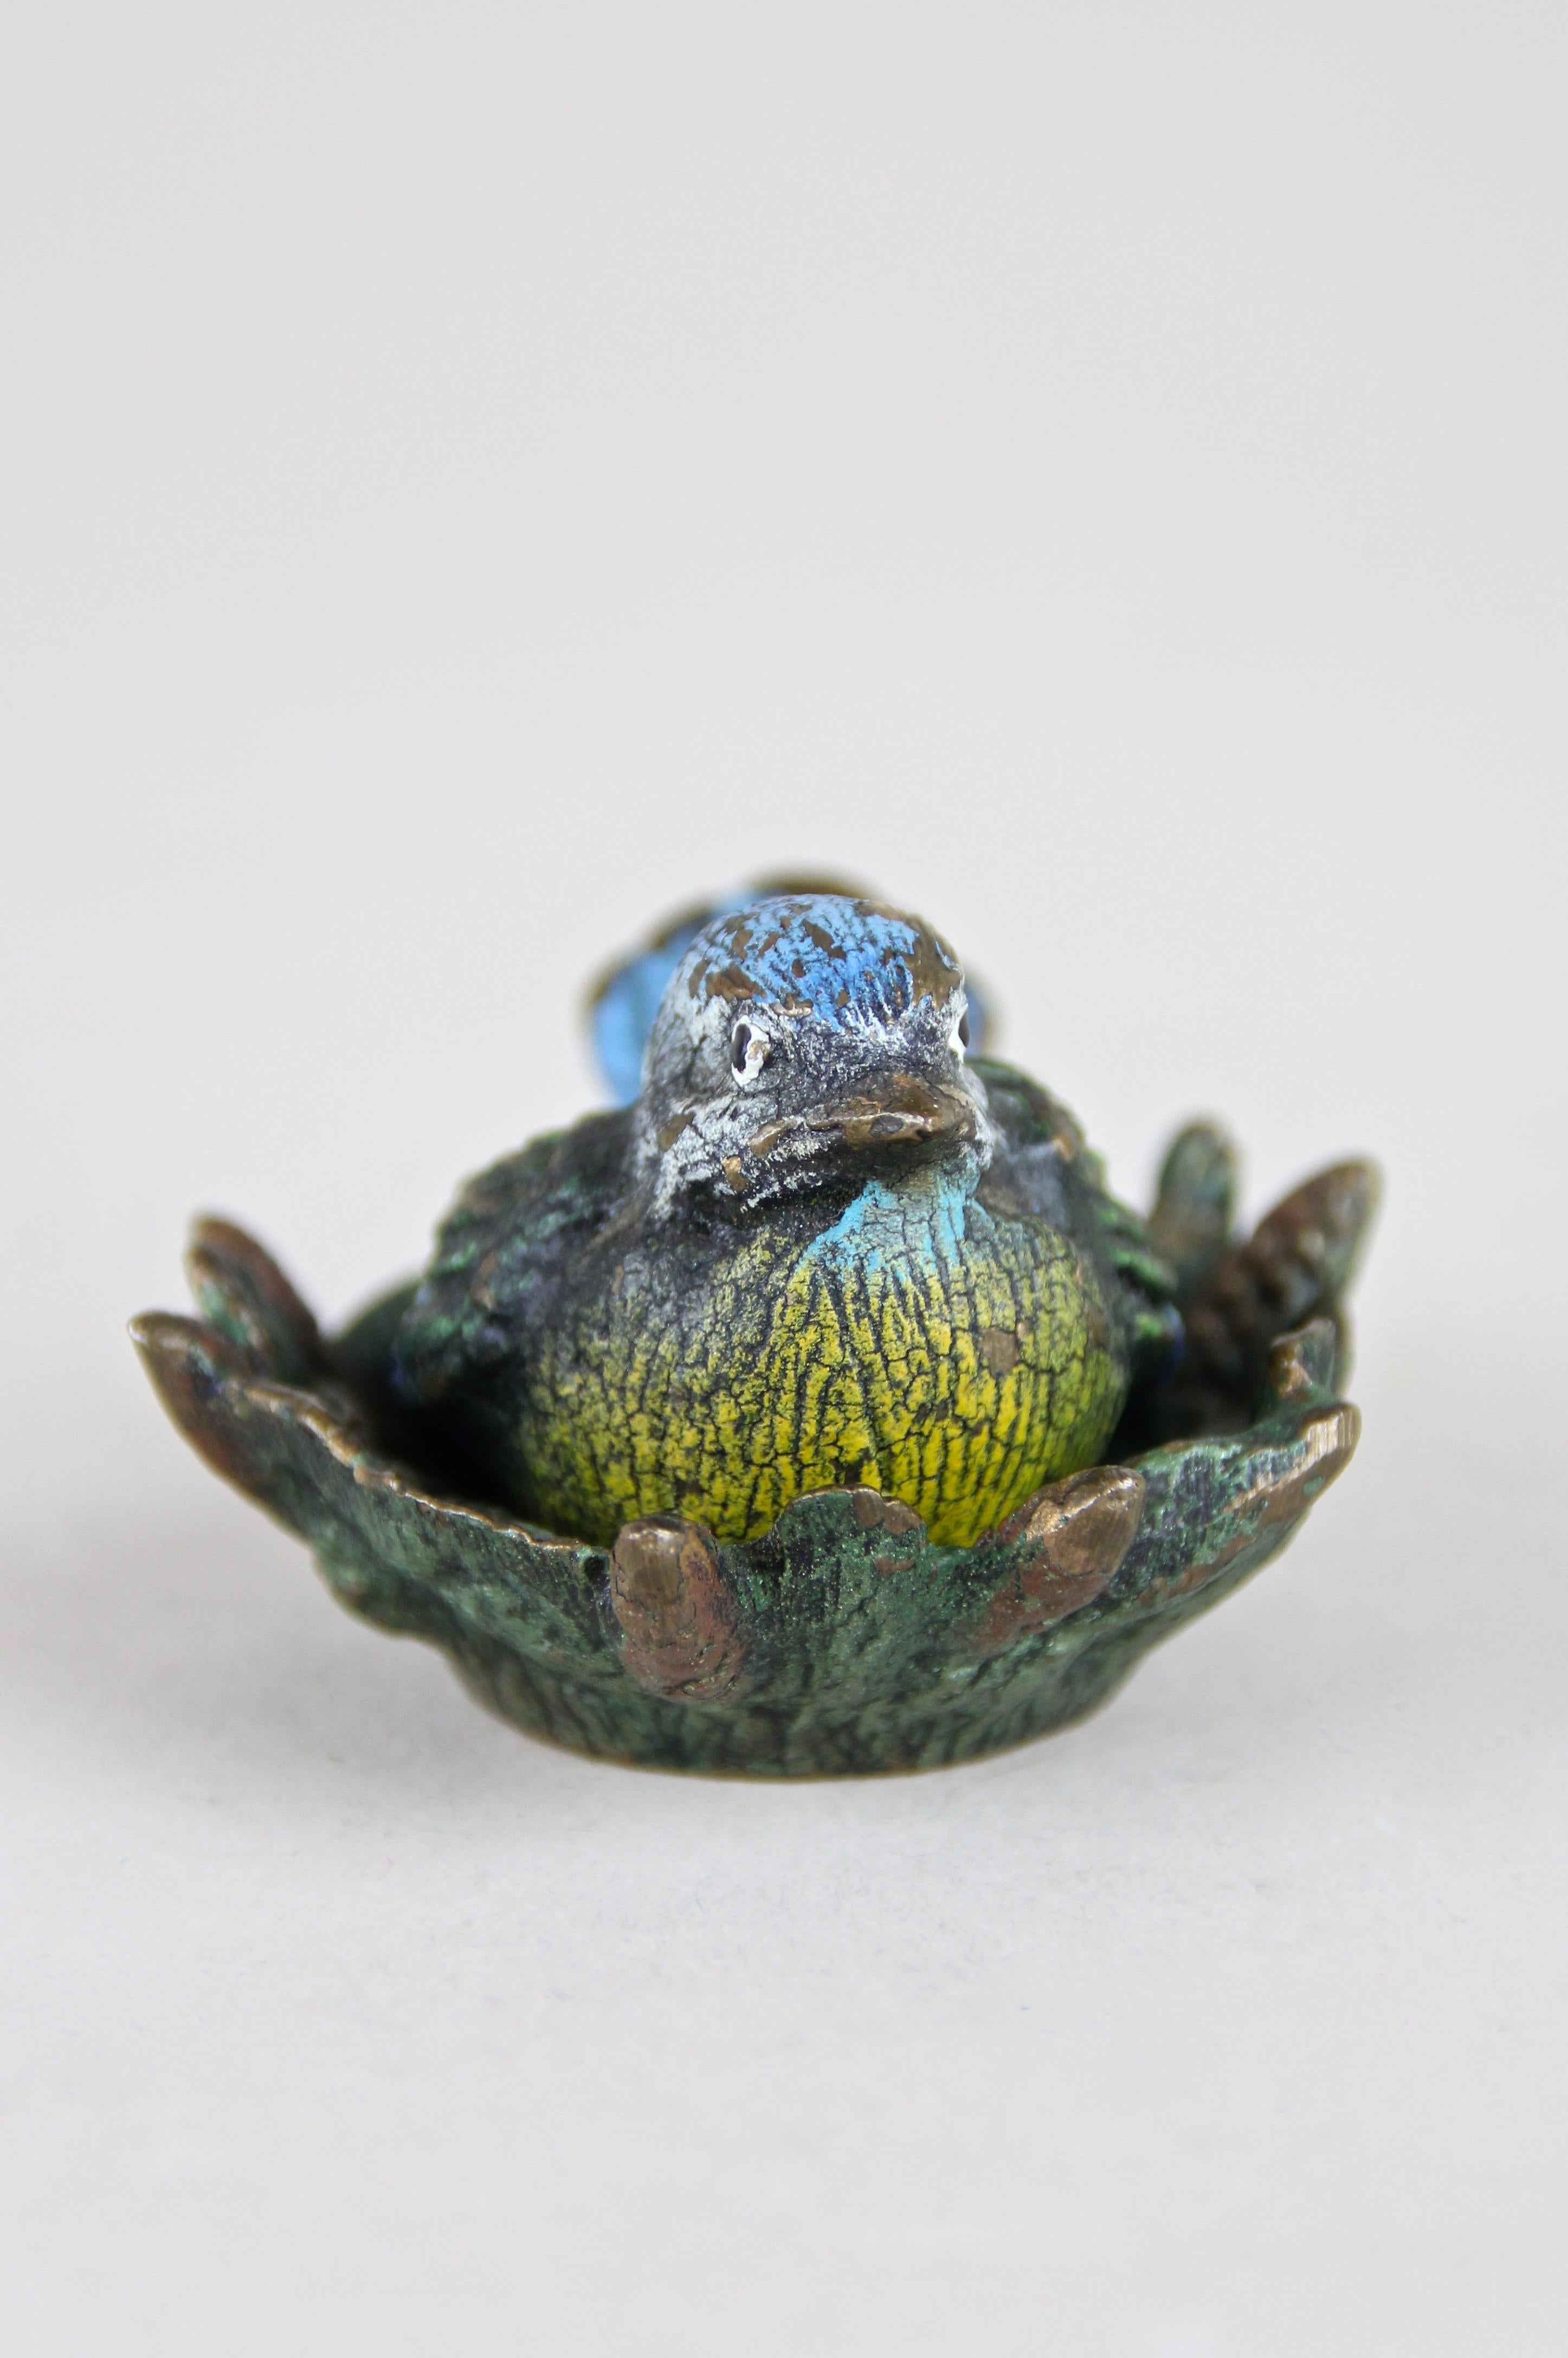 Lovely Vienna bronze bird in nest miniature sculpture from the late 19th century in Austria. Attributed to Franz Xaver Bergmann 1861-1936), one of the leading art casters at the Vienna bronze manufactory, this beautiful processed detailed small bird